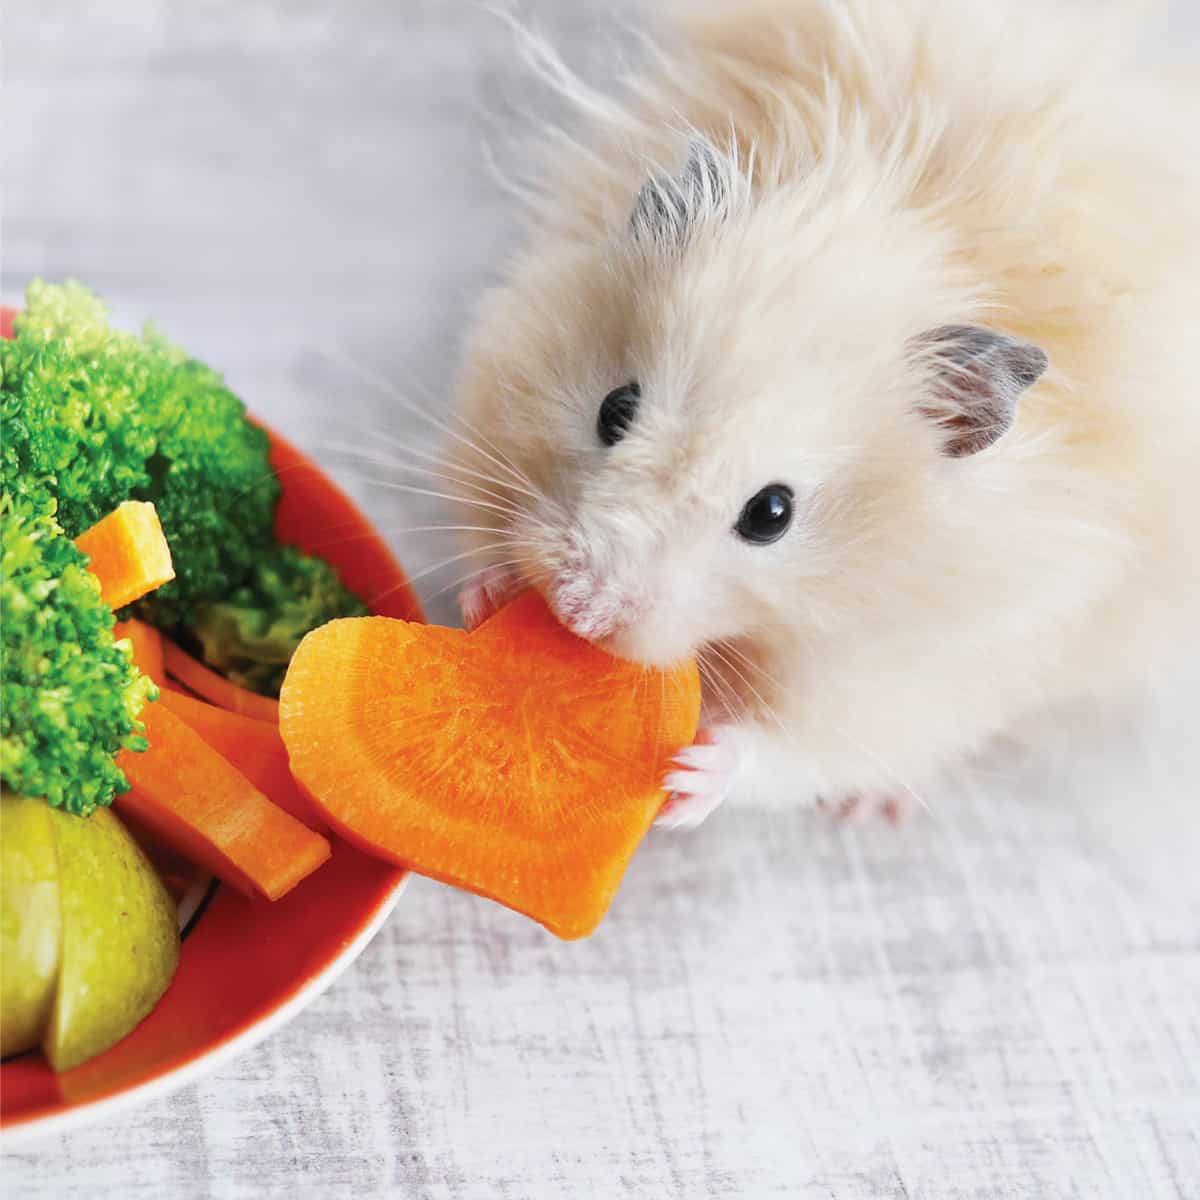 what fruit and veg can a hamster eat